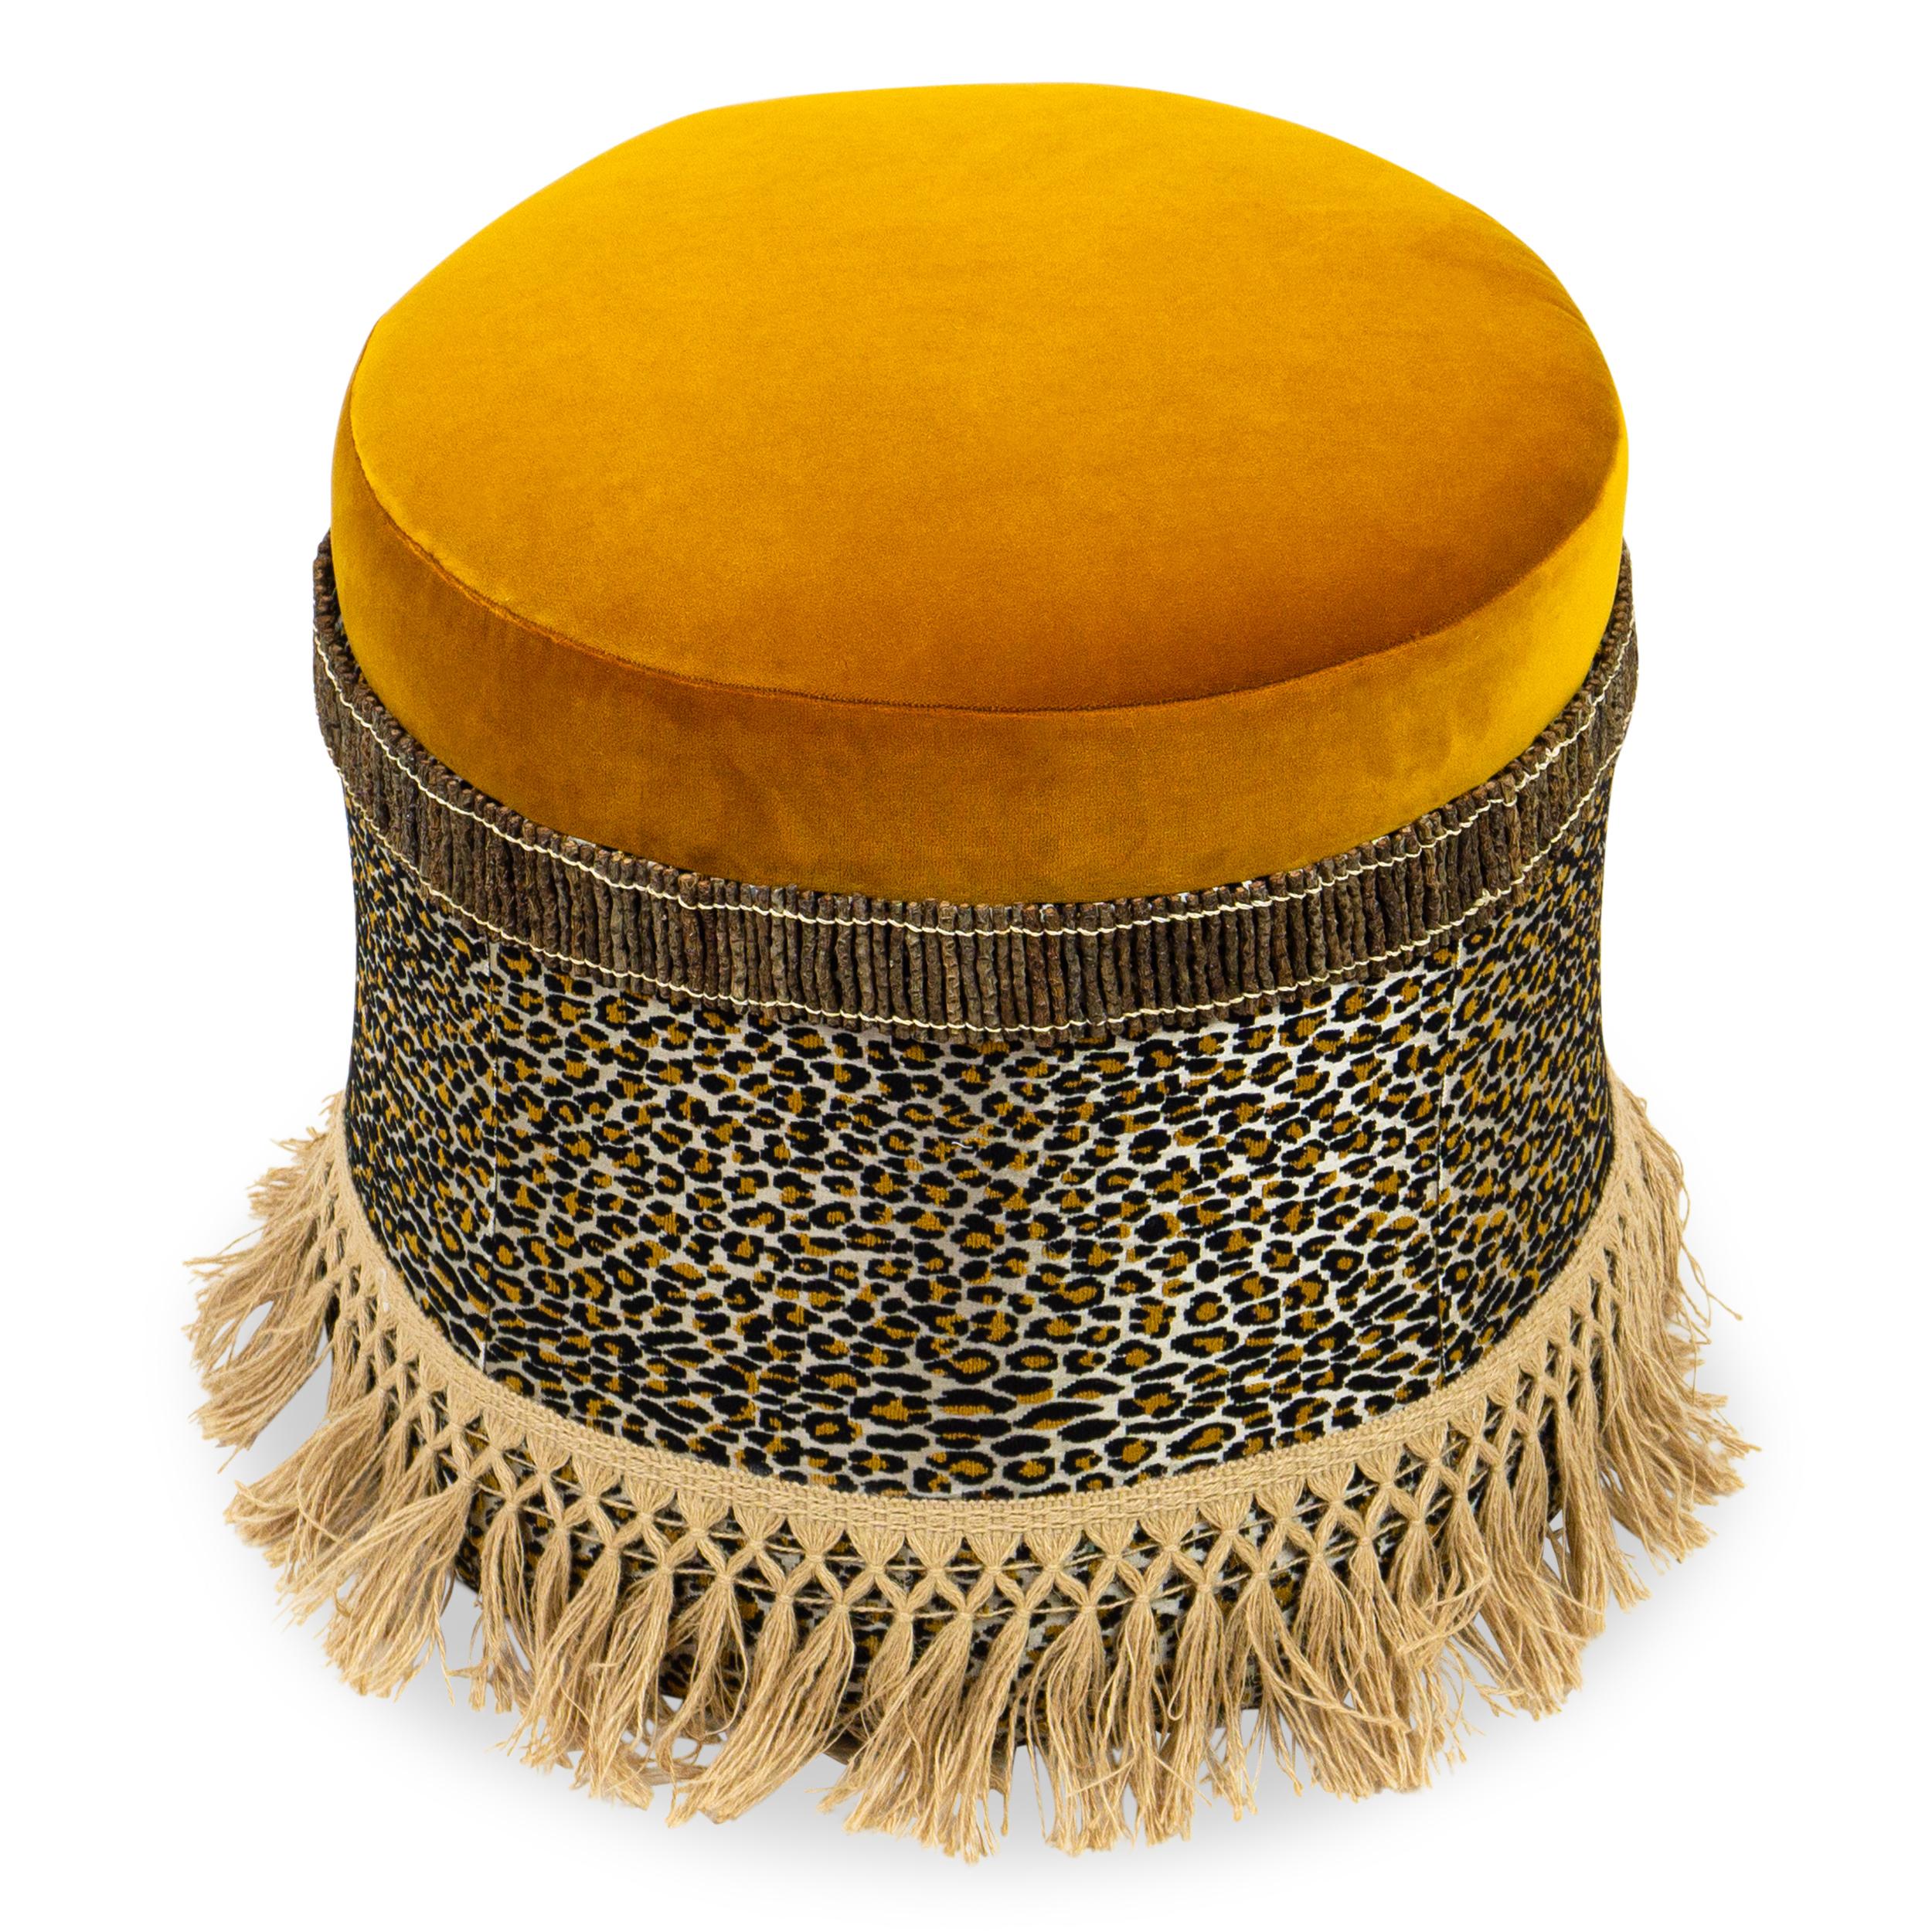 Sexy leopard jacquard ottoman with golden velvet seat, macrame hemp tassel fringe and twig tape. Great for occasional seating, boudoir or bedroom. 

Measurements:
Overall: 18”W x 18”D x 17”H
Seat height: 17